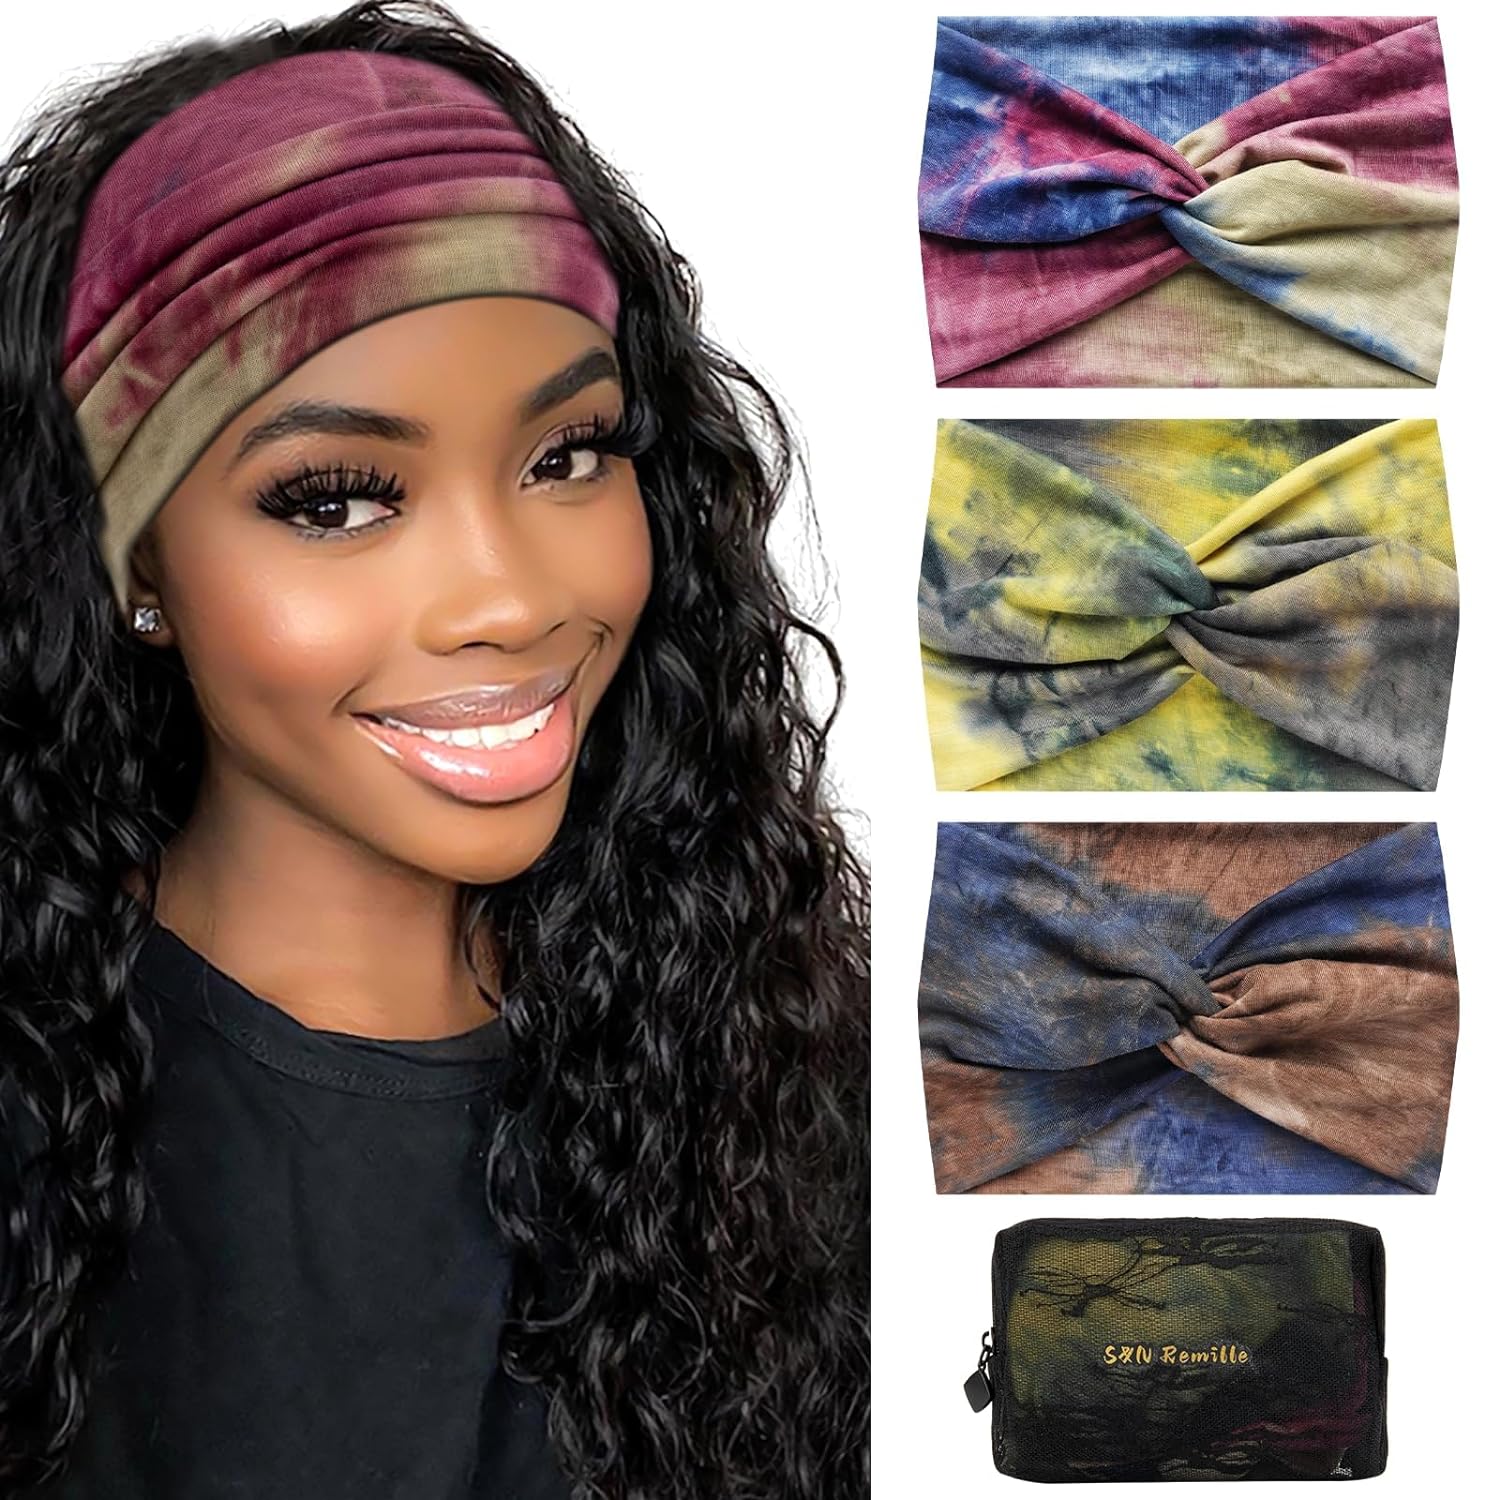 Wide Boho Headbands for Women Extra Large Turban Headband Hairband Hair Twisted Knot Accessories 3 Pack